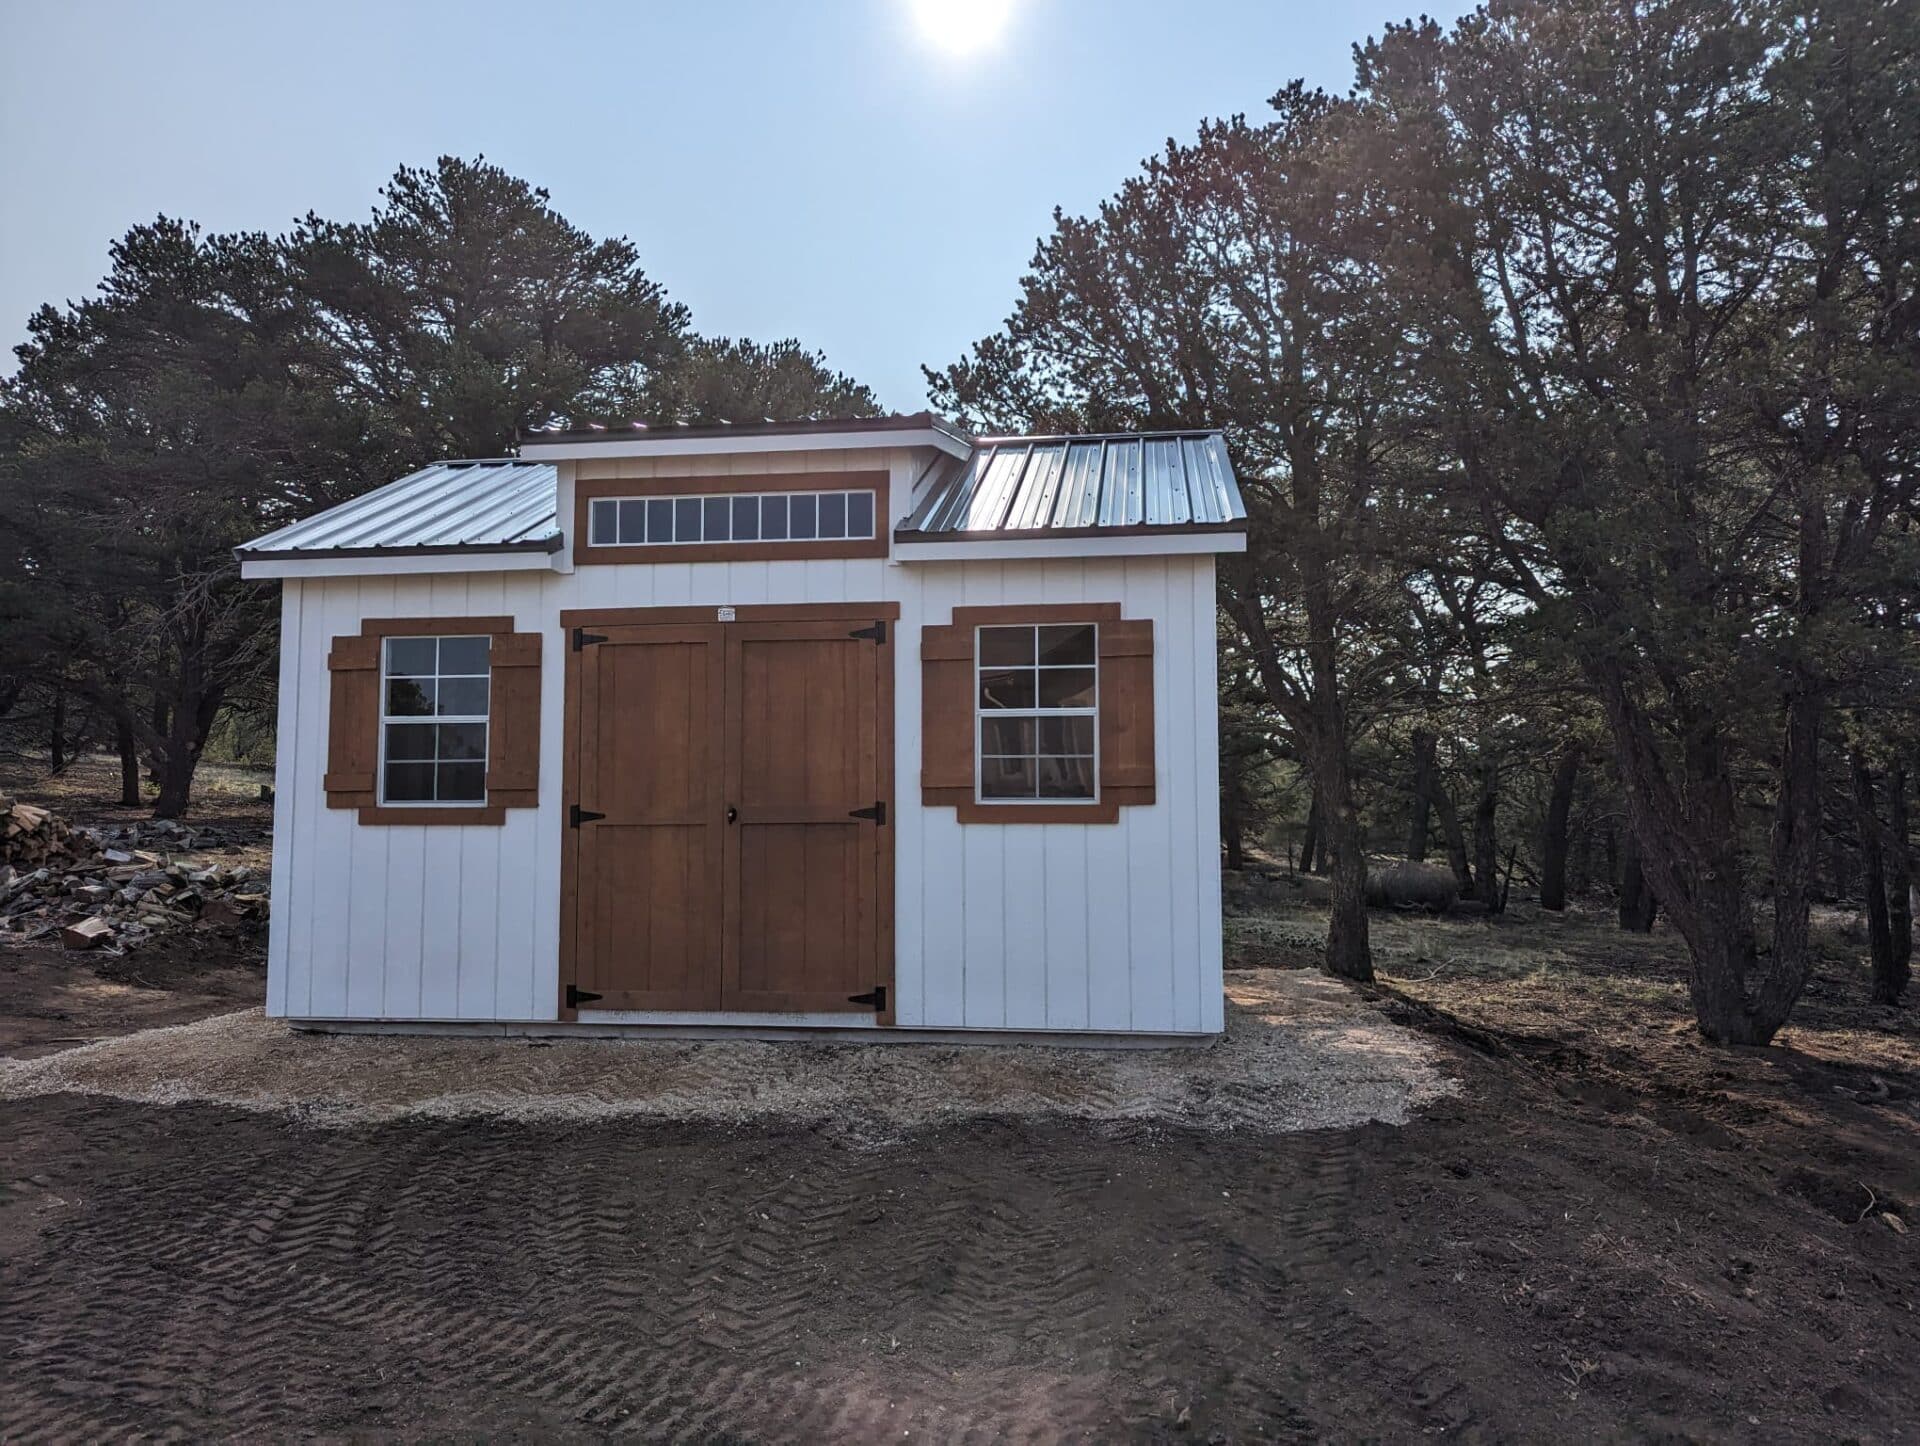 Front view of 12x16 Studio Gable in Cotopaxi, CO with three windows and double doors, wood trim with white walls.